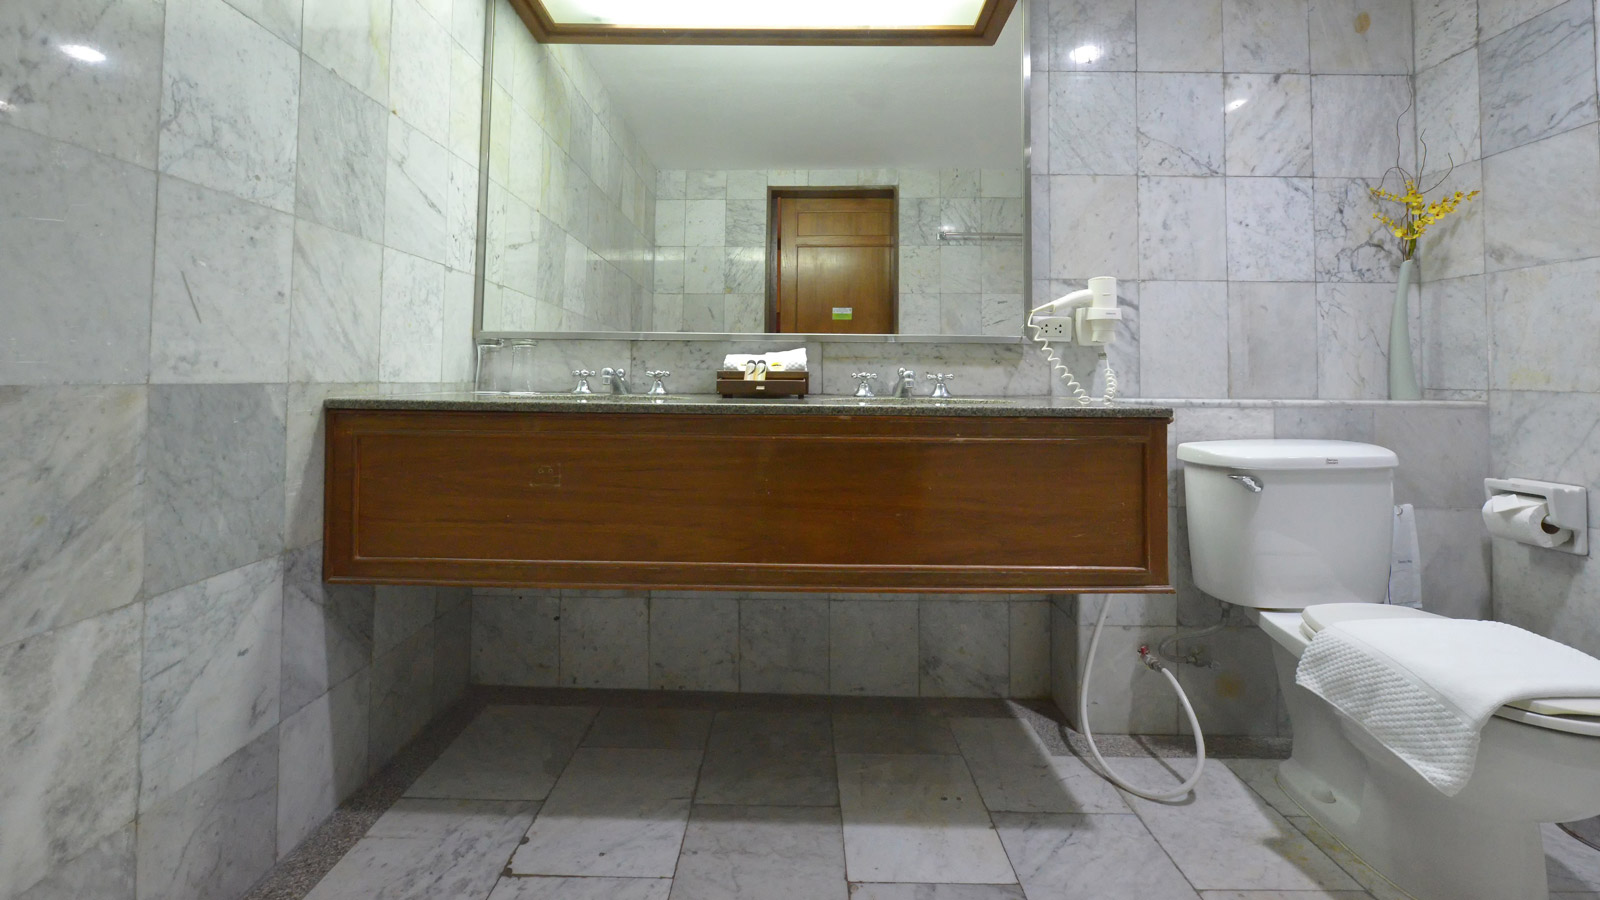 Executive Suites - Bathroom at Loei Palace Hotel - 黎府宫殿酒店